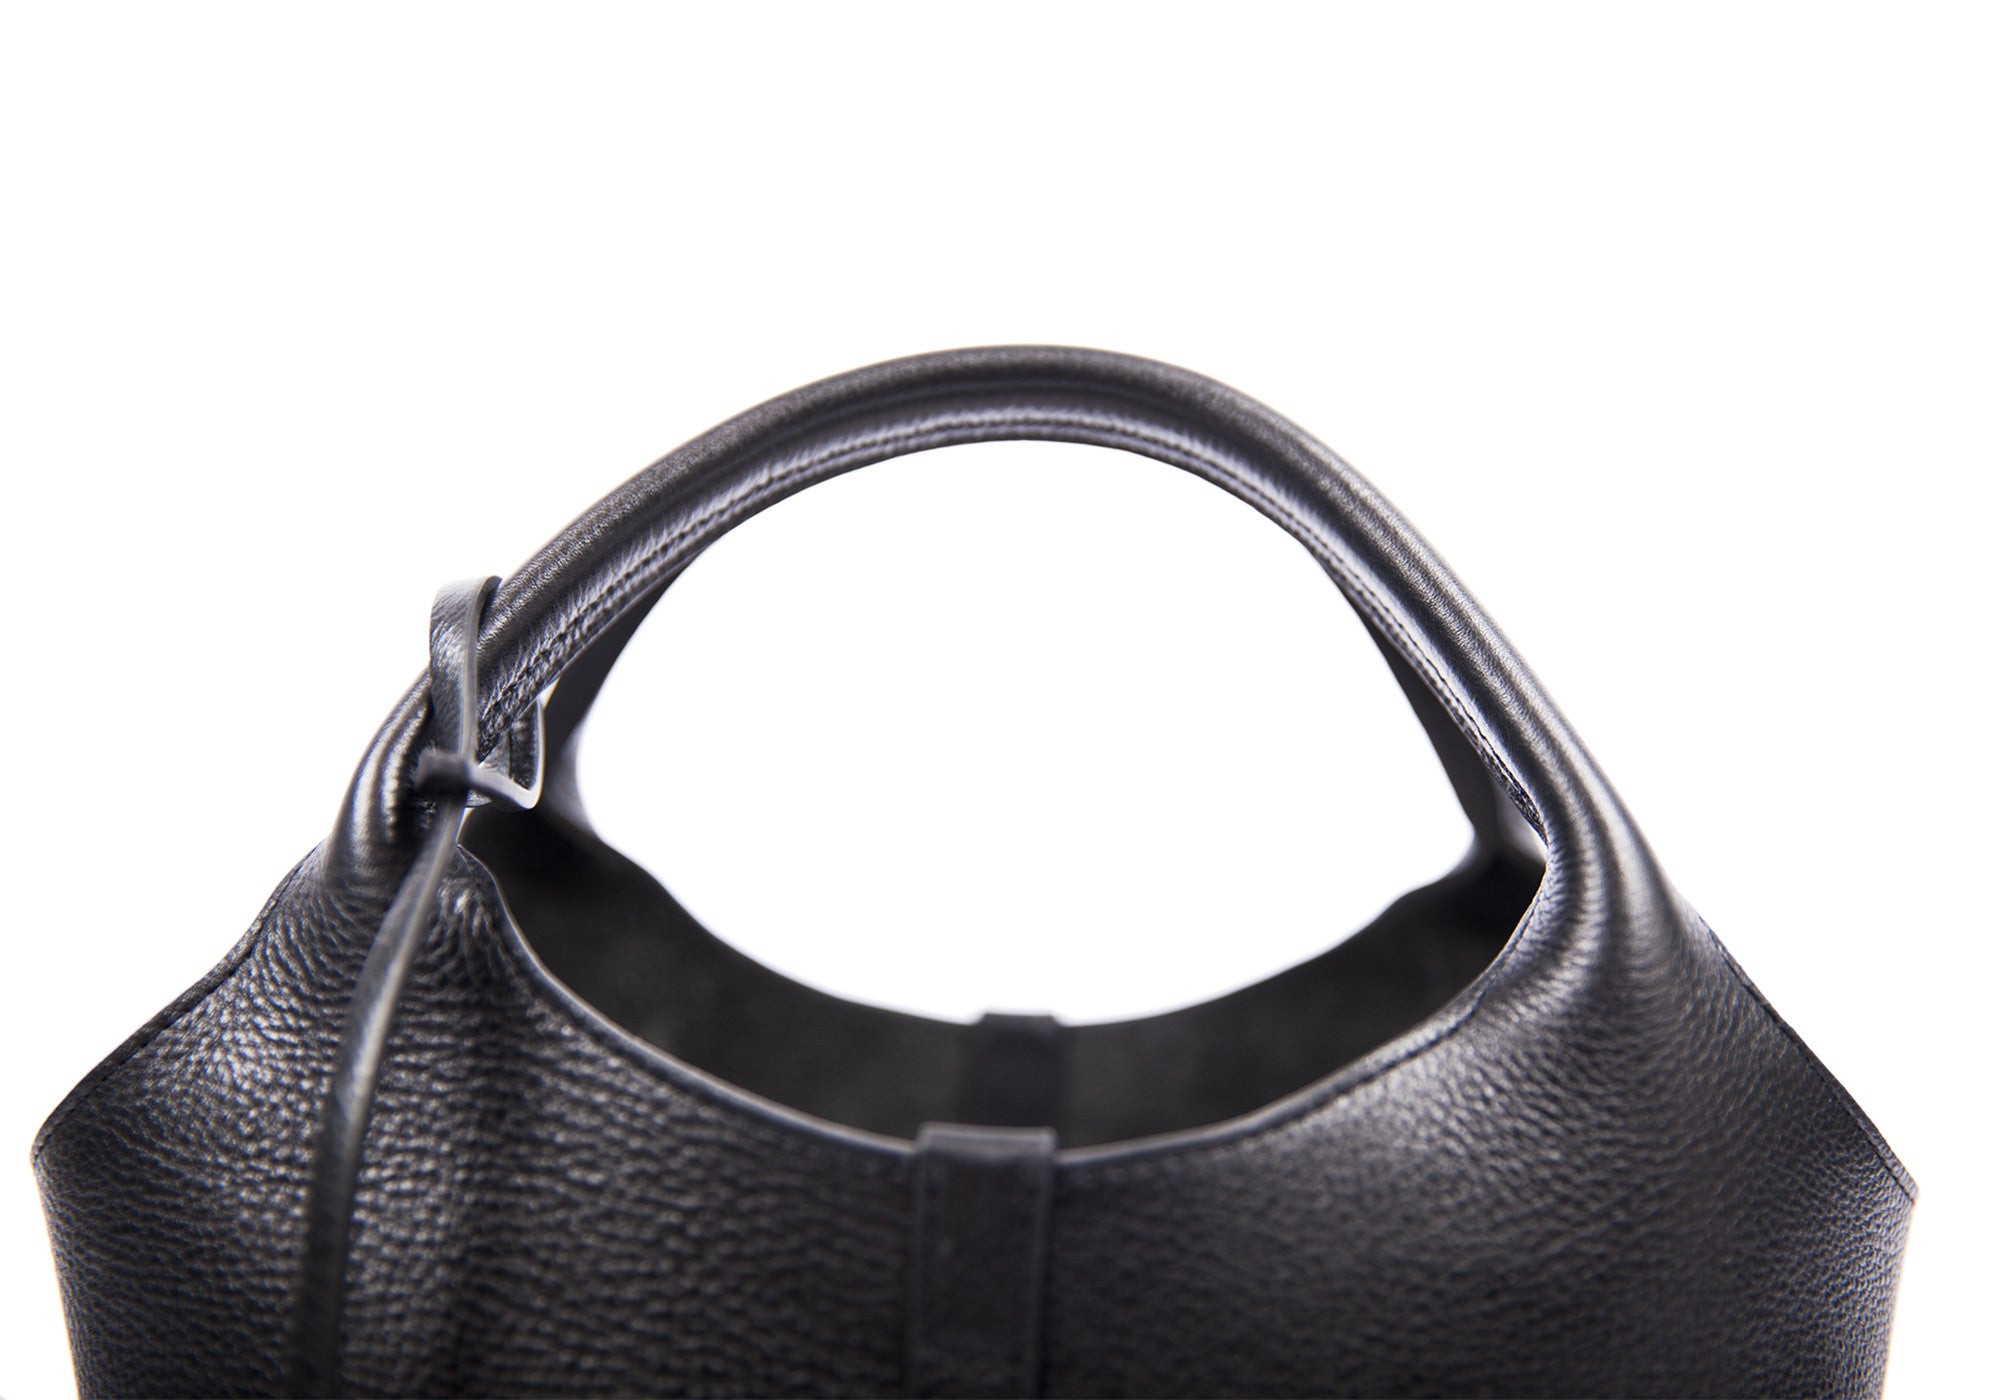 Top Leather Strap of The One-Piece Bag Black